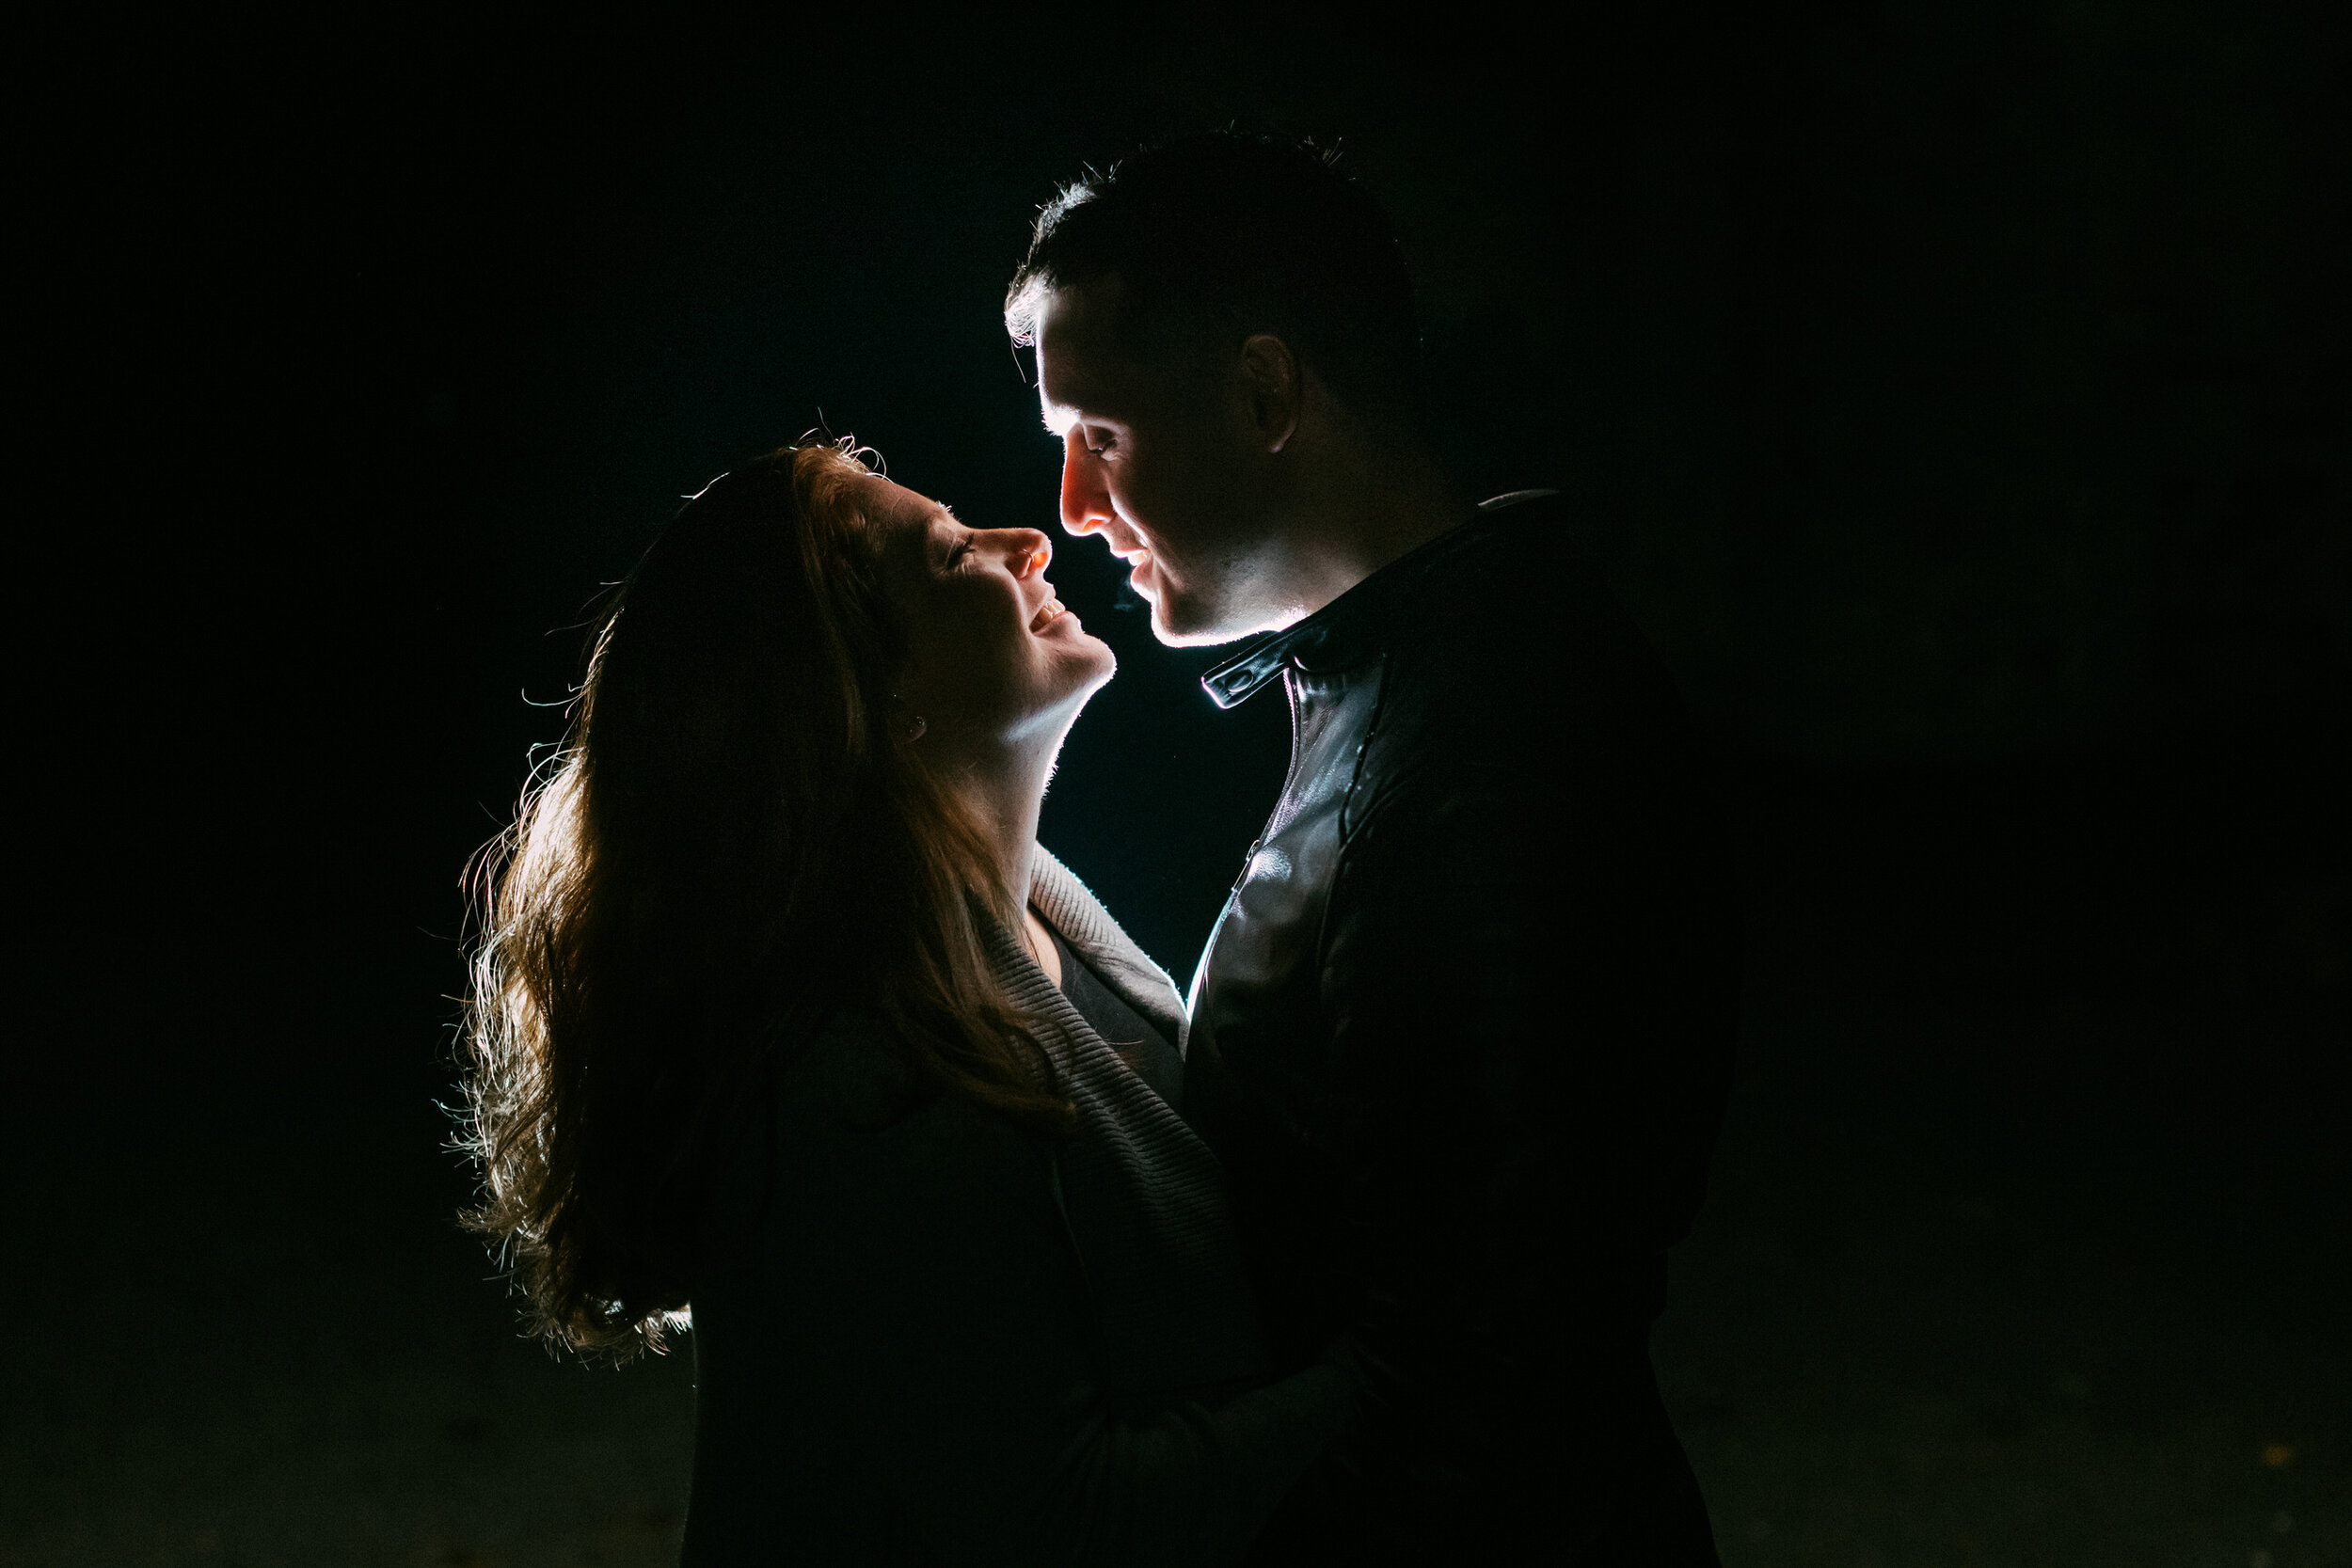 Wintery Autumn Adelaide Hills Engagement Session 34.JPG